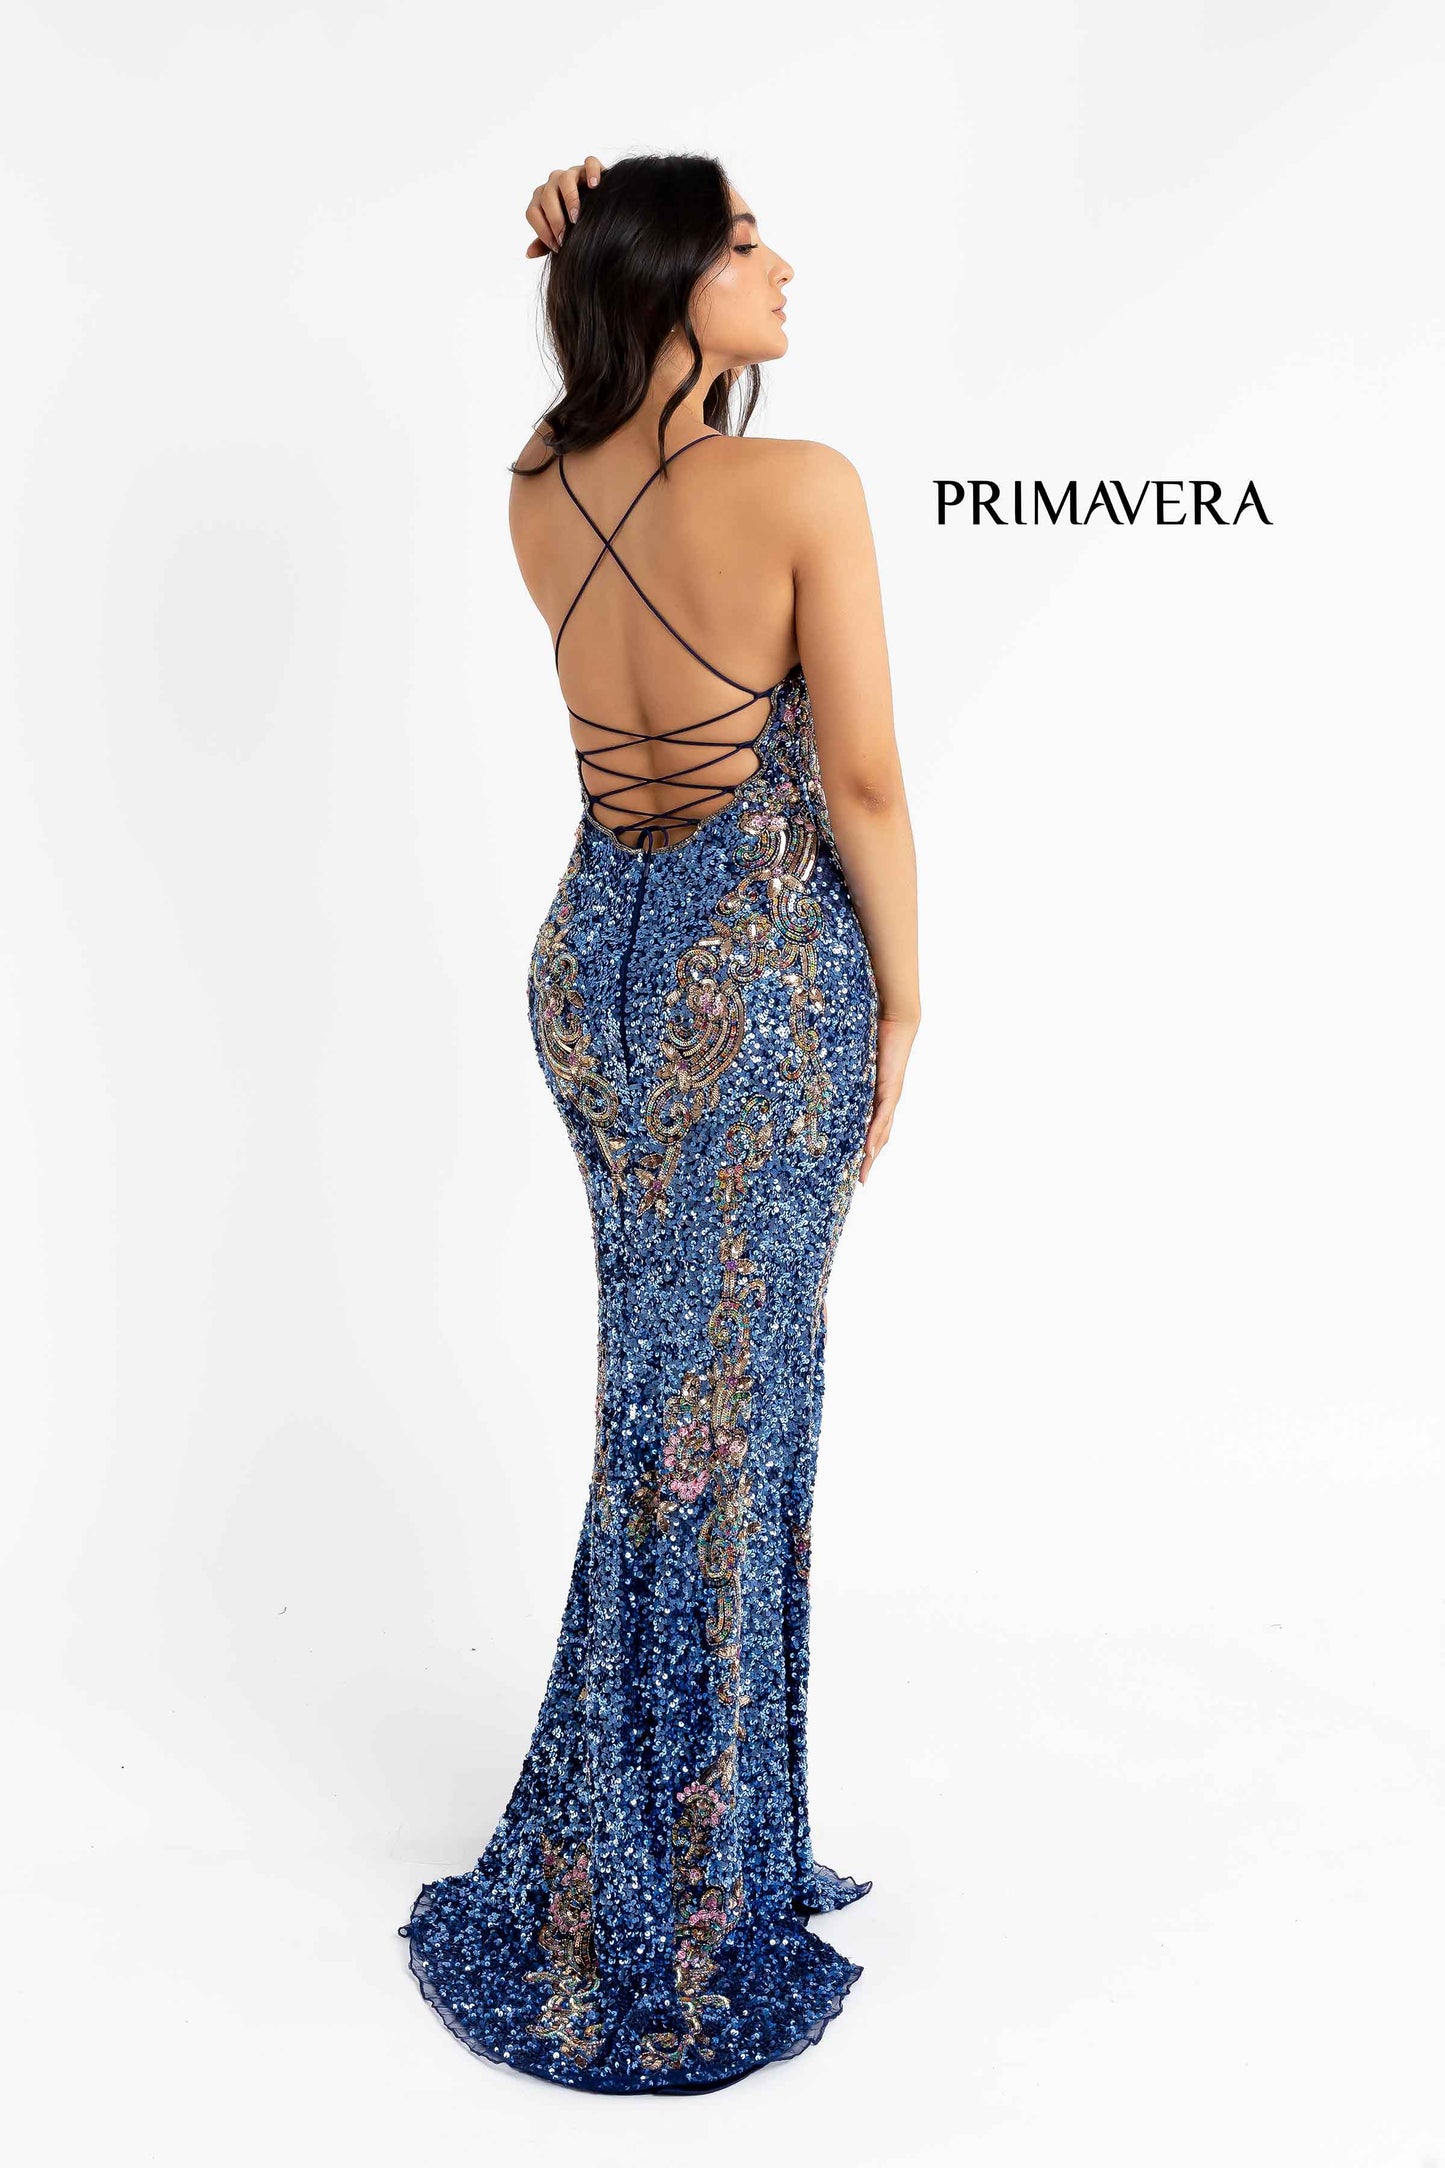 Primavera Couture 3211 Midnight Blue is a Long fitted sequin Embellished Formal Evening Gown. This Prom Dress Features a deep V Neck with an open Corset lace up back. Beaded & embellished elegant scroll pattern accentuate curves. Fully beaded prom dress with floral pattern and side slit. Long Sequin Gown featuring a v neckline. slit in the fitted skirt, Slit in Thigh. Stunning Pageant Dress, Prom Gown & More! back